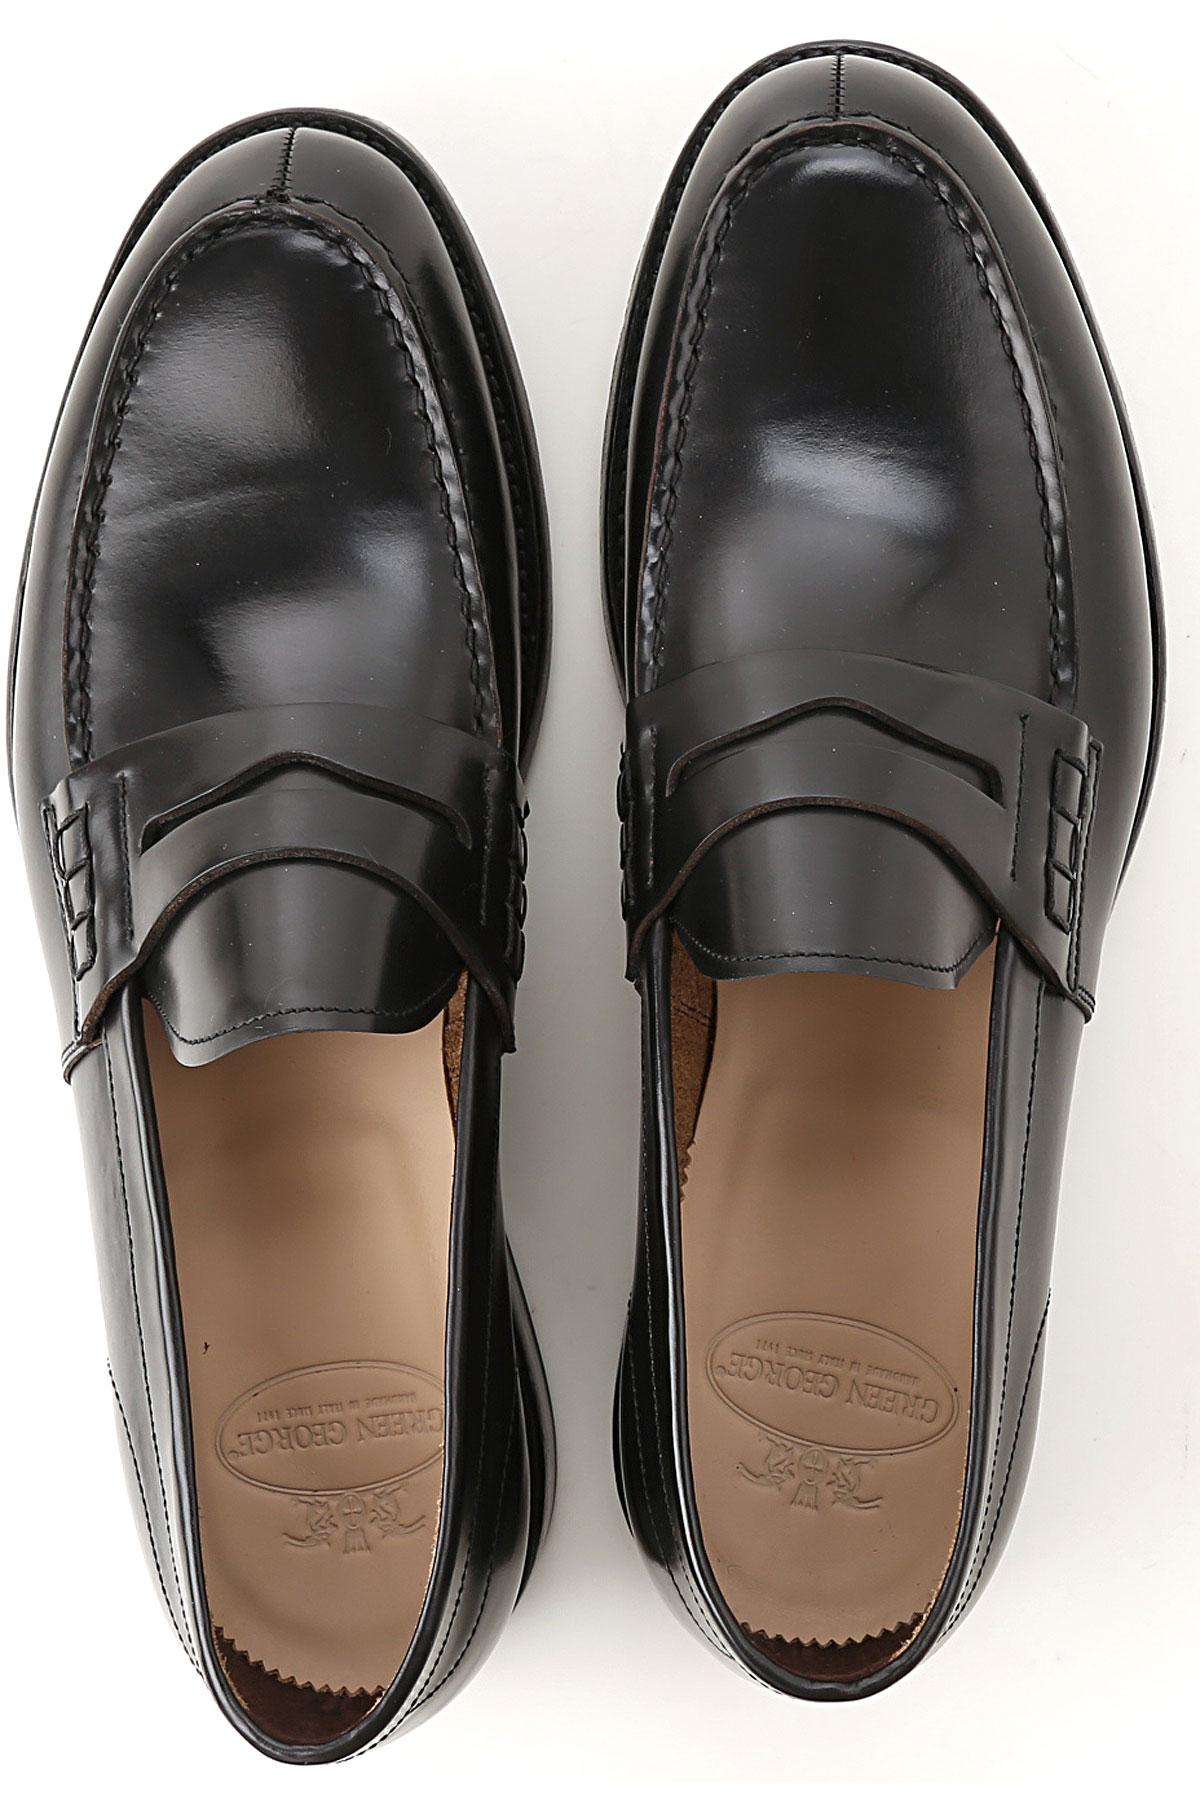 Green George Loafers For Men On Sale in Black for Men - Lyst